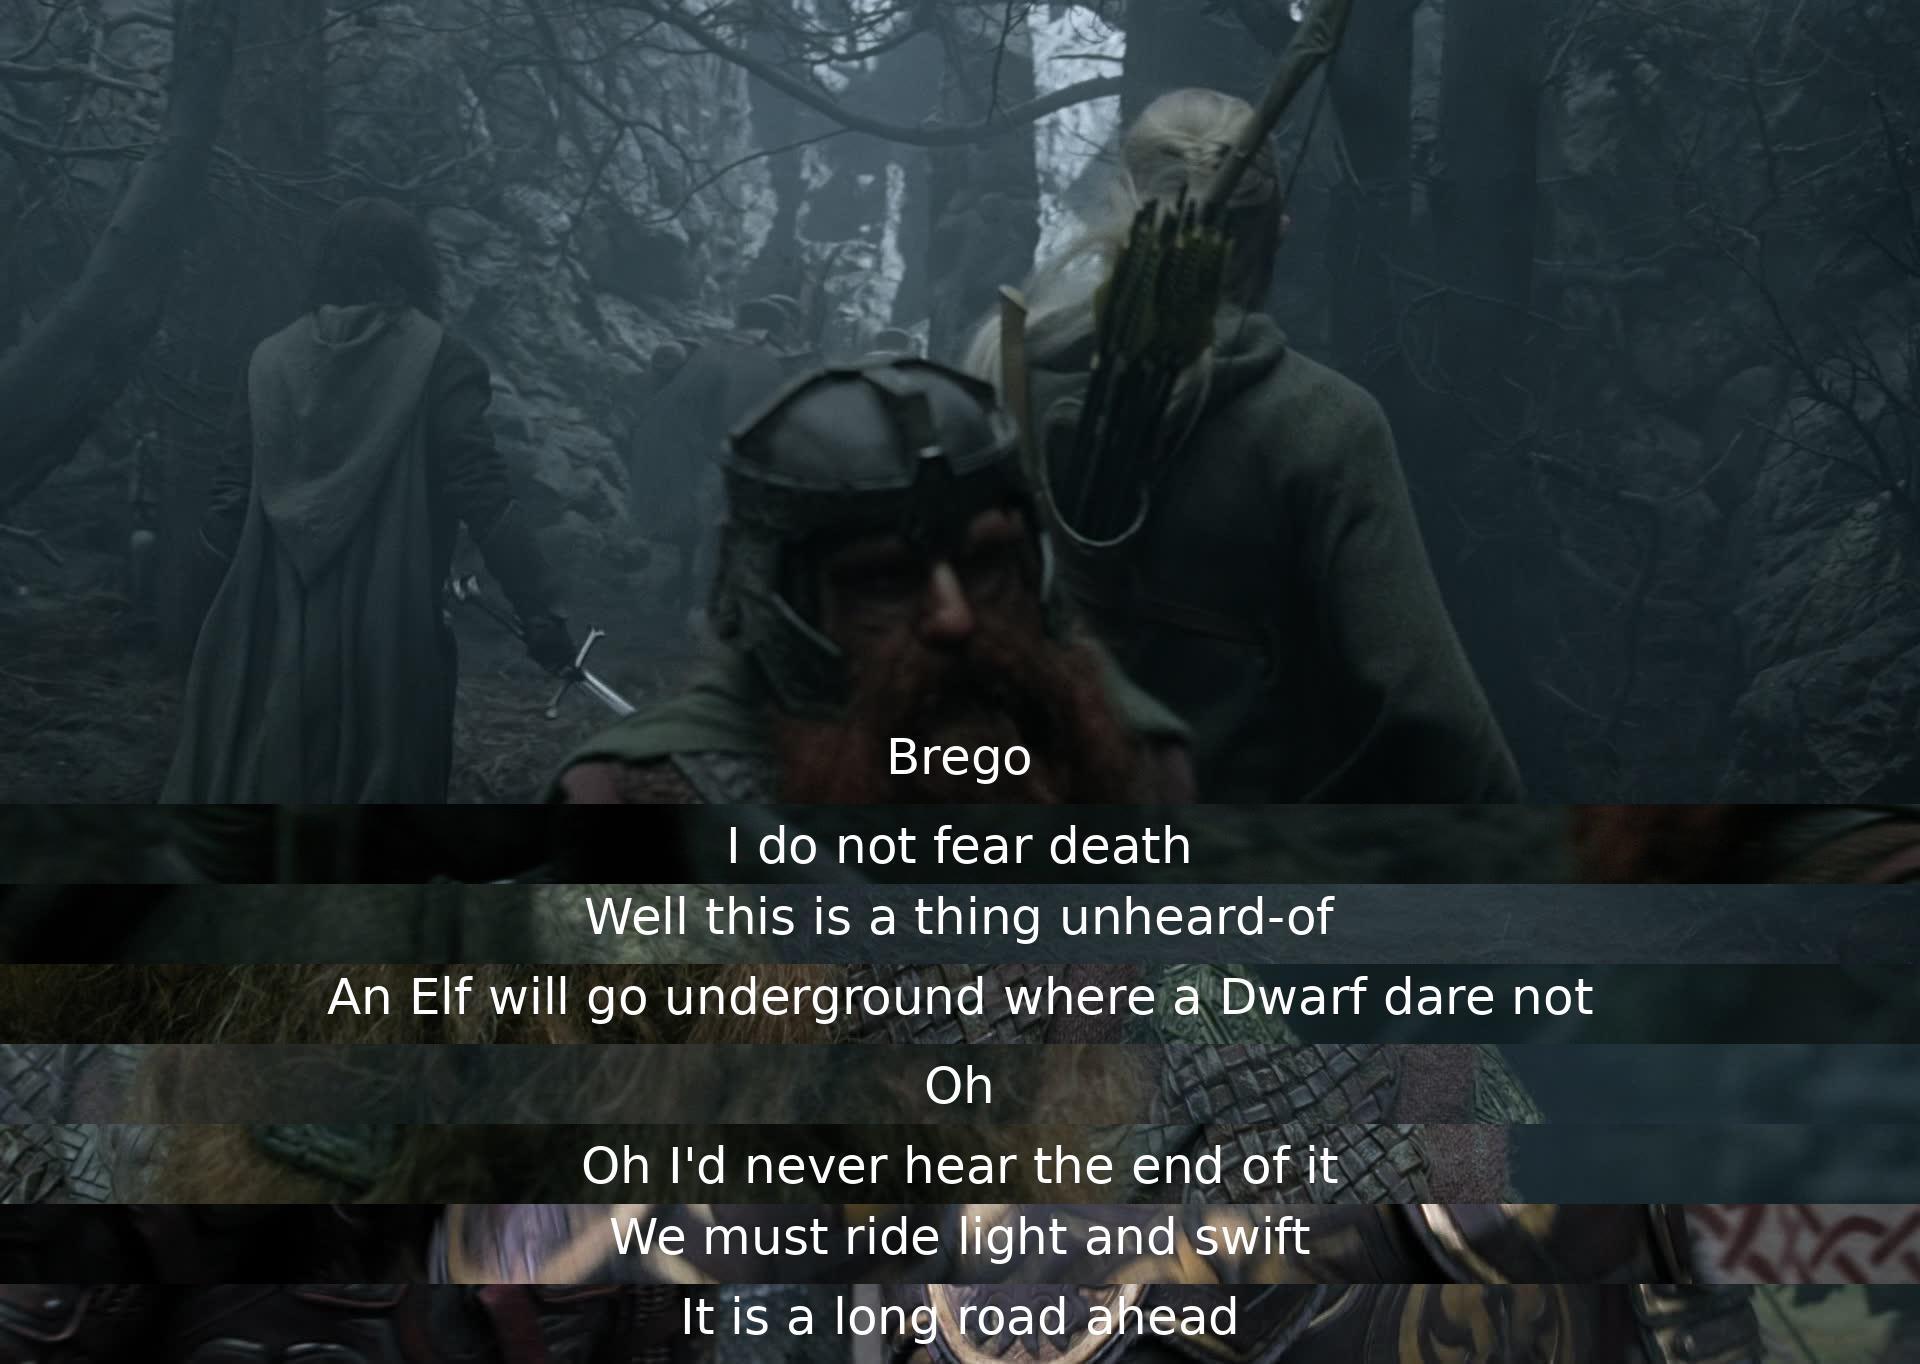 Brego expresses fearlessness towards death. A discussion ensues about the rareness of such courage, comparing the actions of an Elf and a Dwarf. The need for speed and efficiency due to the long journey ahead is emphasized.